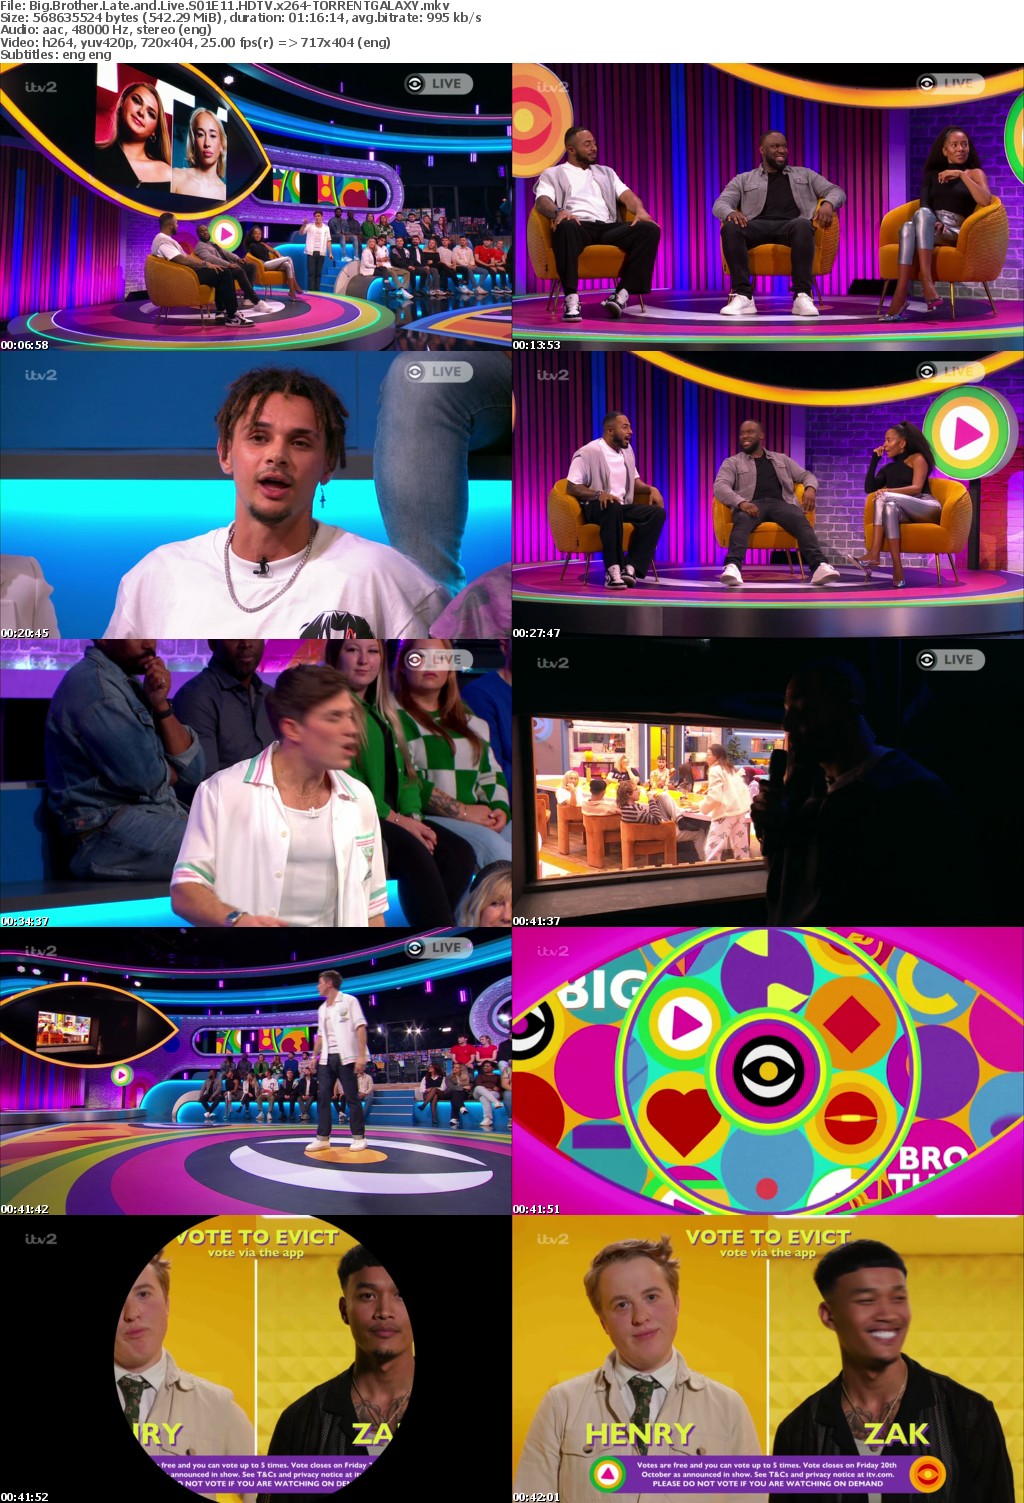 Big Brother Late and Live S01E11 HDTV x264-GALAXY